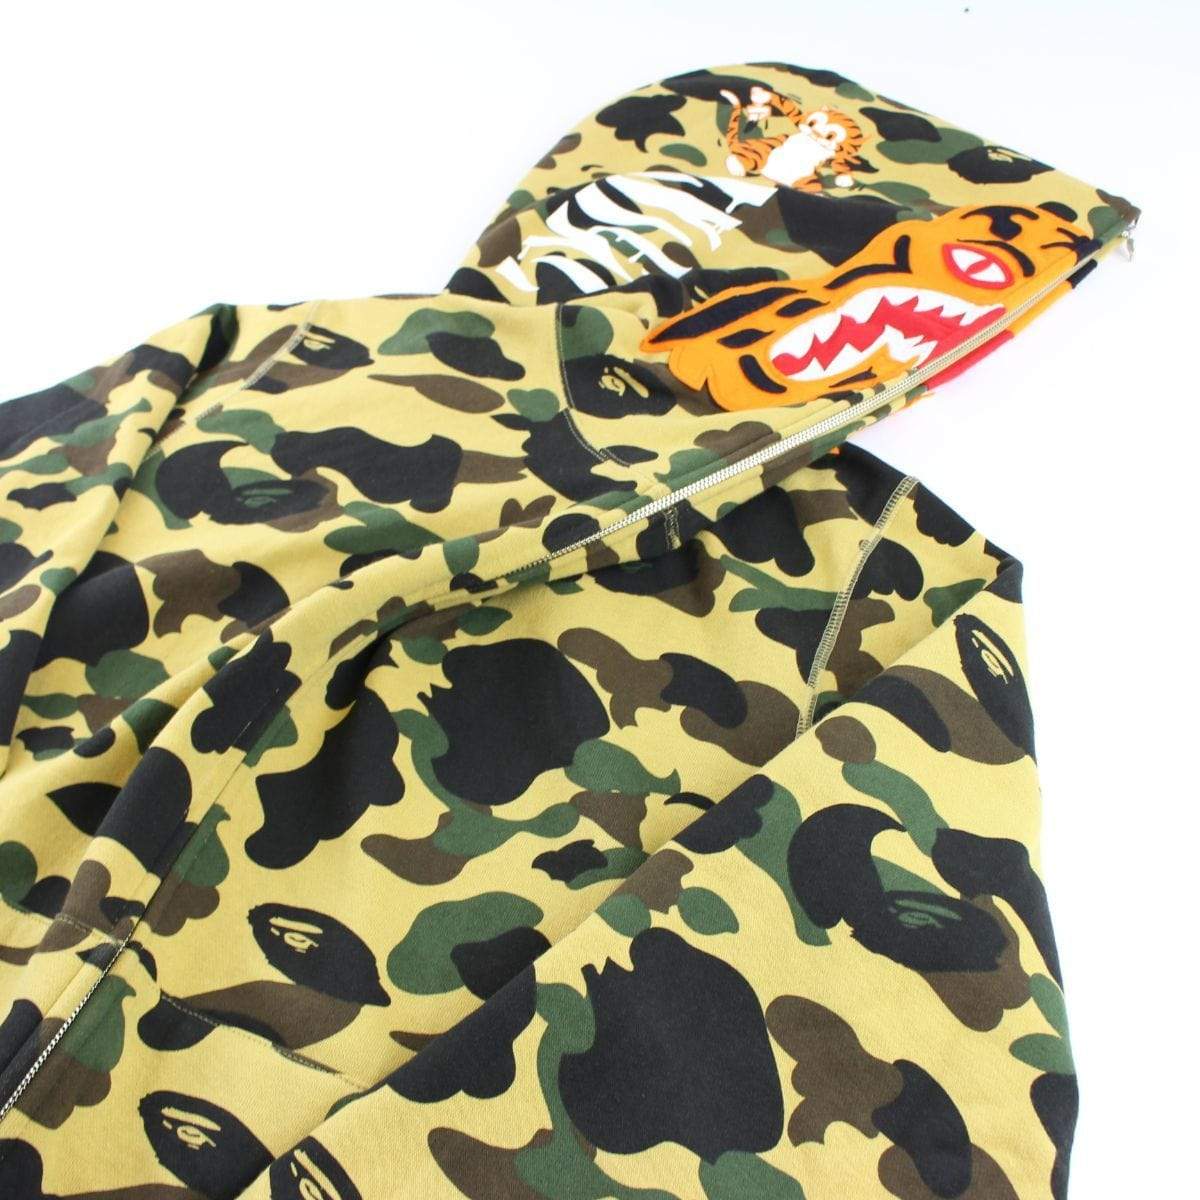 Bape 1st Yellow Camo Tiger Hoodie - SaruGeneral